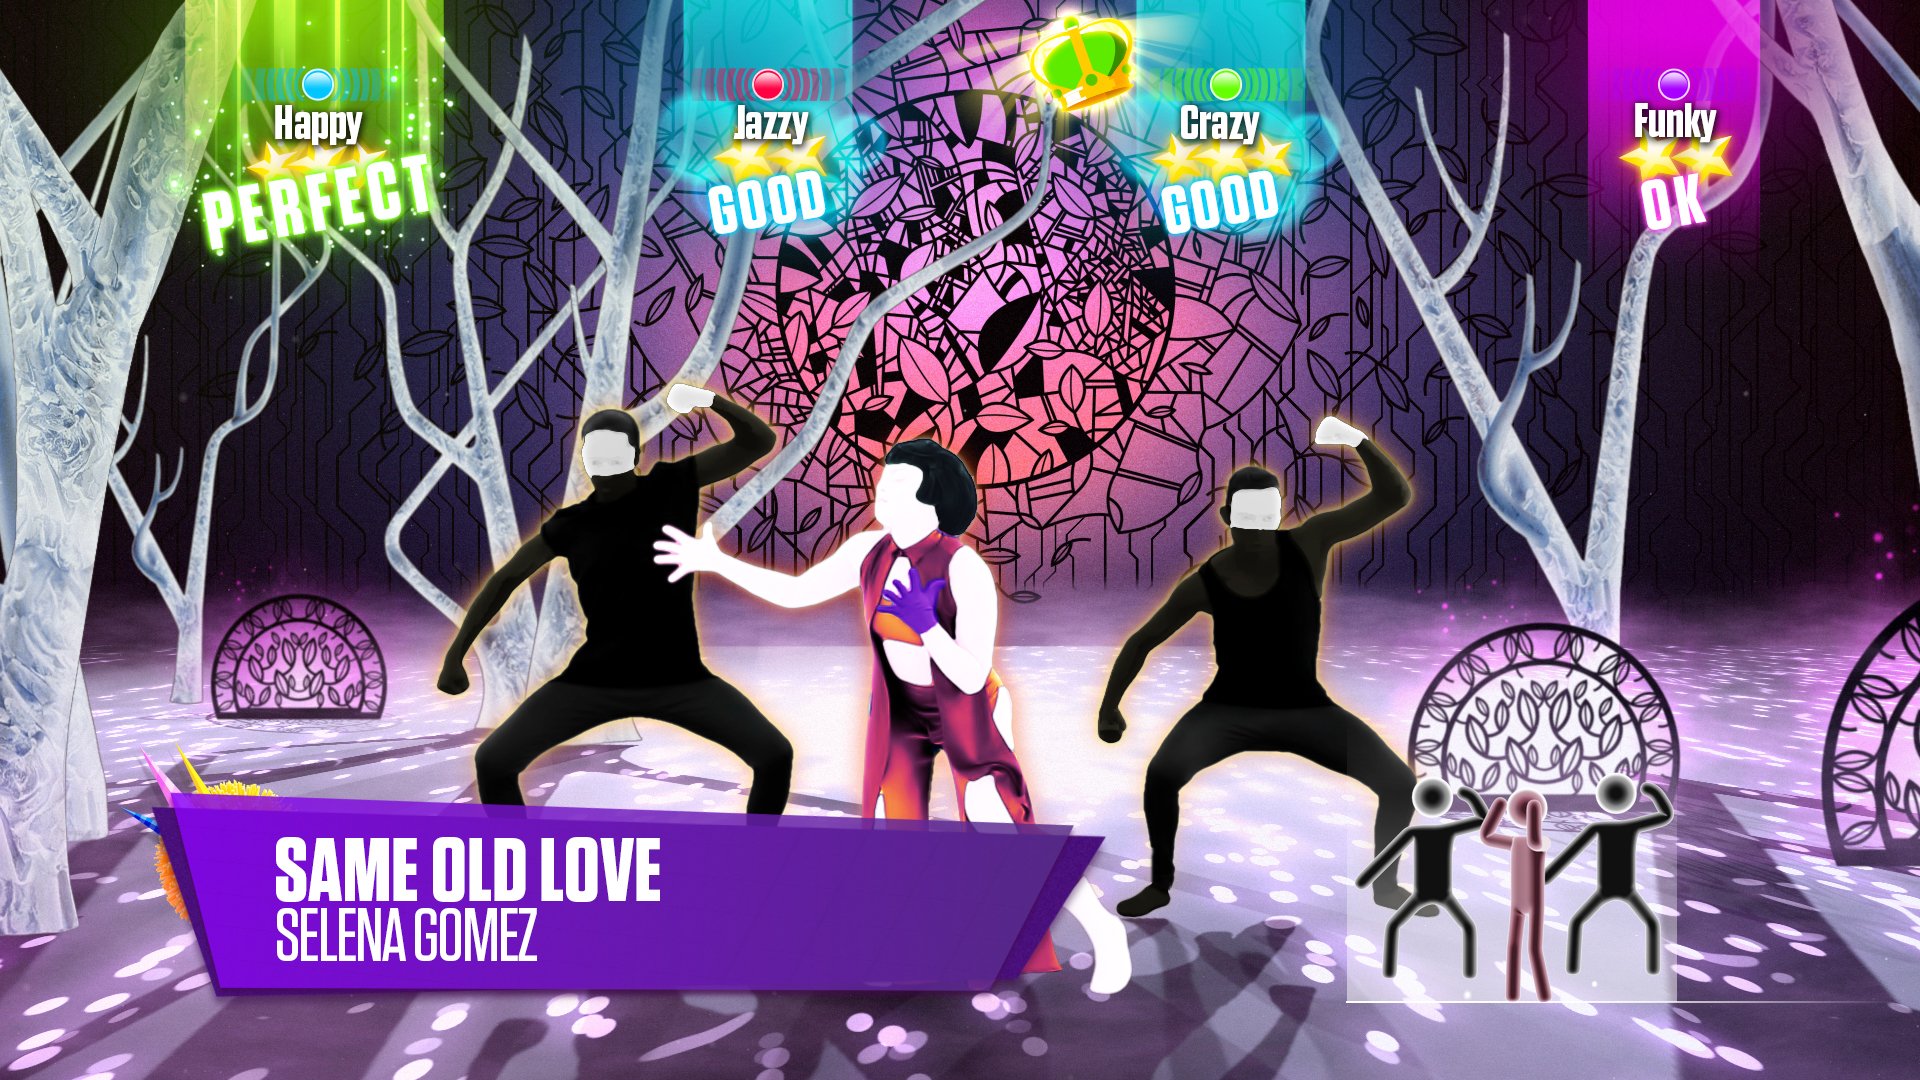 Just Dance 2016 - PlayStation 3